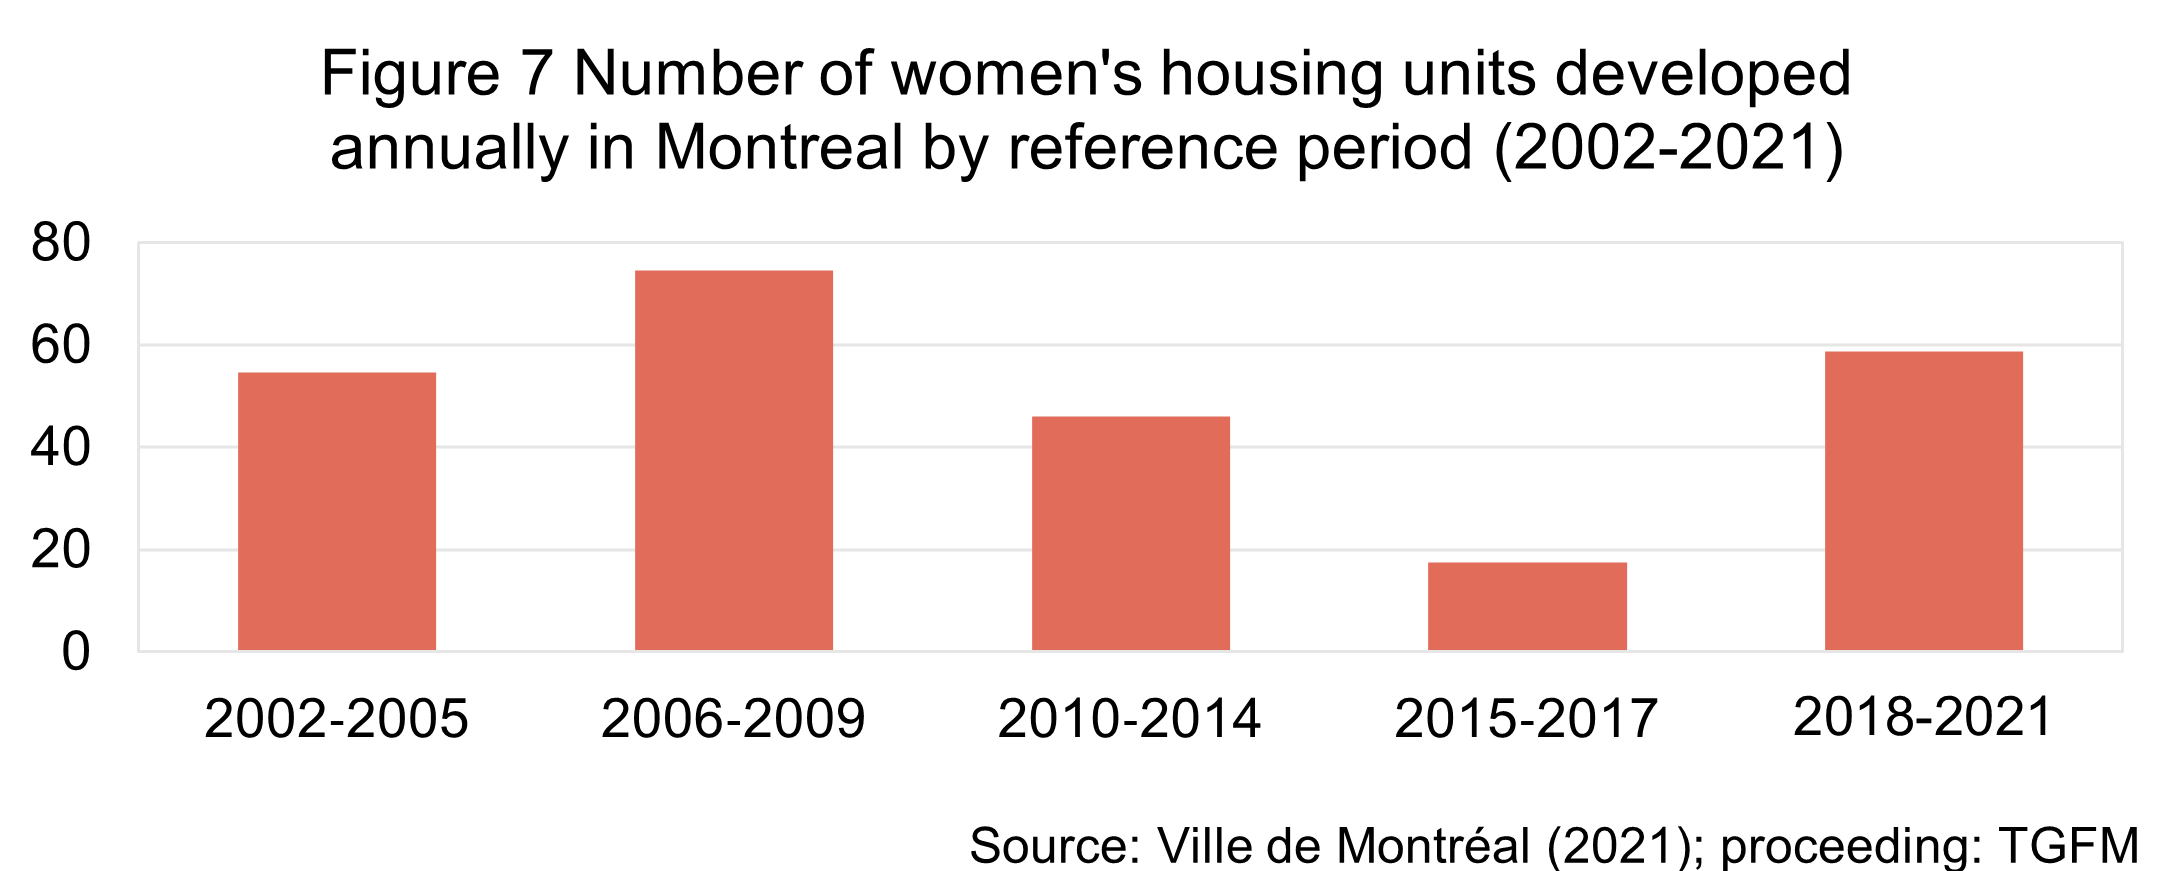 The figure illustrates that the number of women's housing units developed in Montreal averaged about 50 per year between 2002 and 2014. This number dropped to 18 units per year between 2015 and 2017. Since 2018, there has been a return to normal with 59 units per year. 